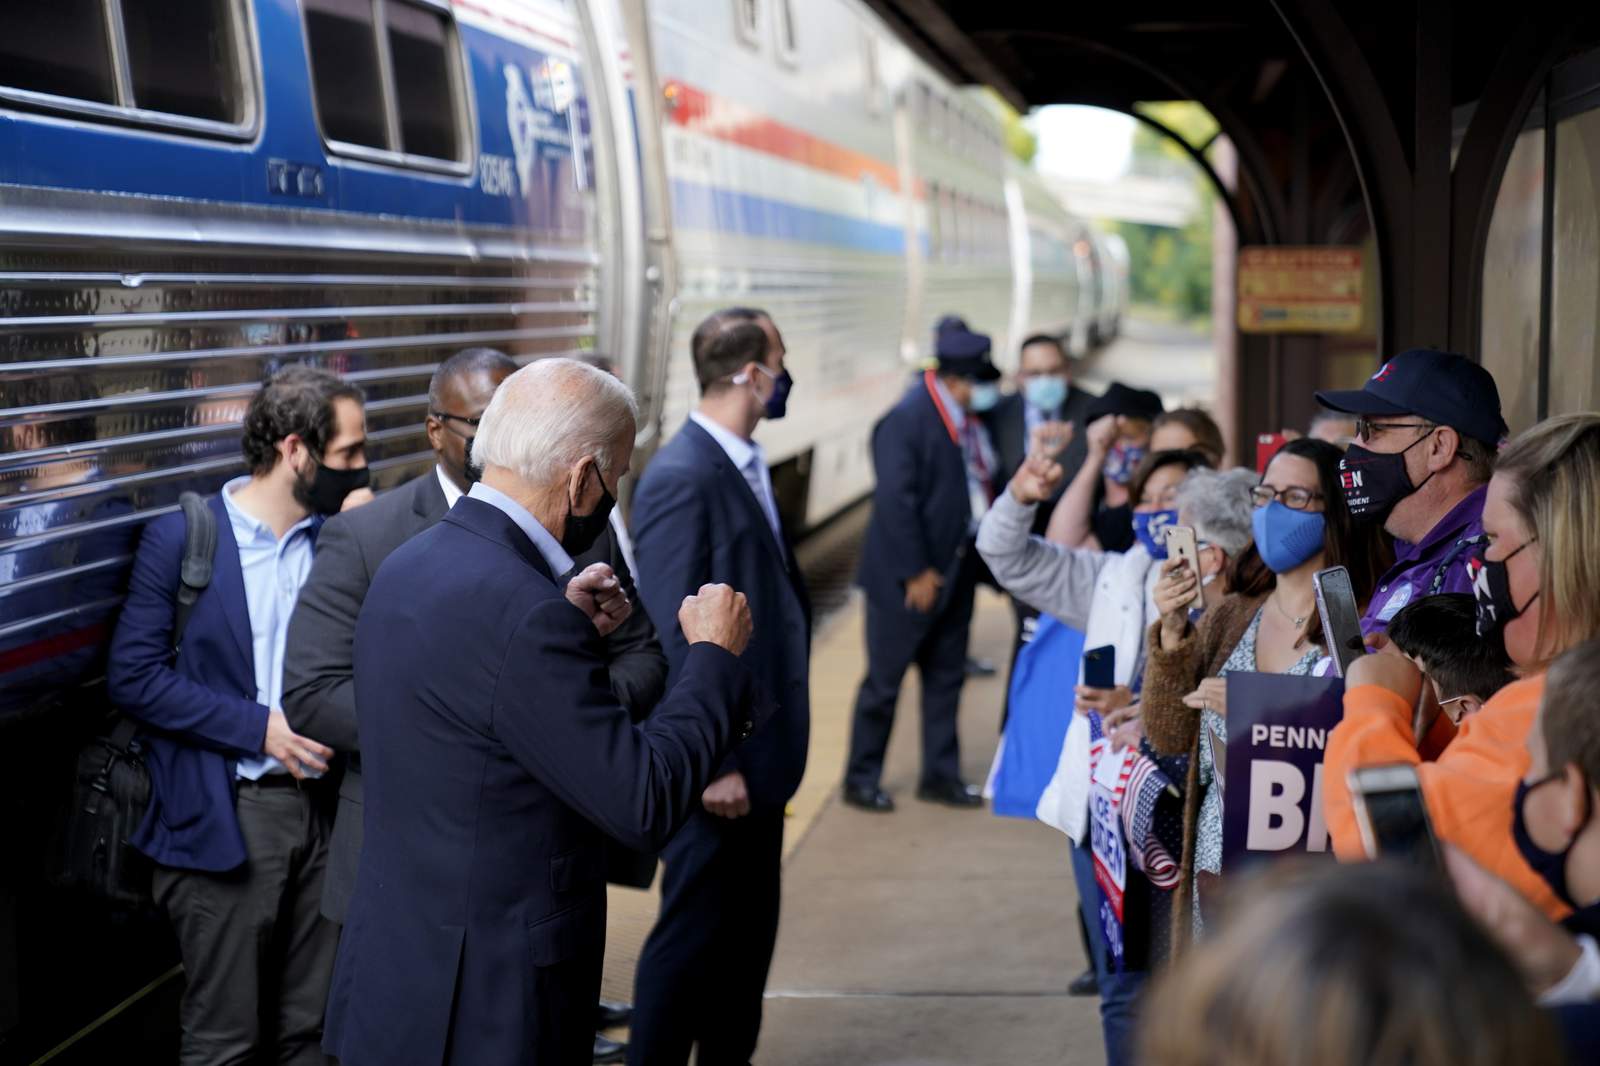 After pandemic delay, Biden launching in-person canvassing